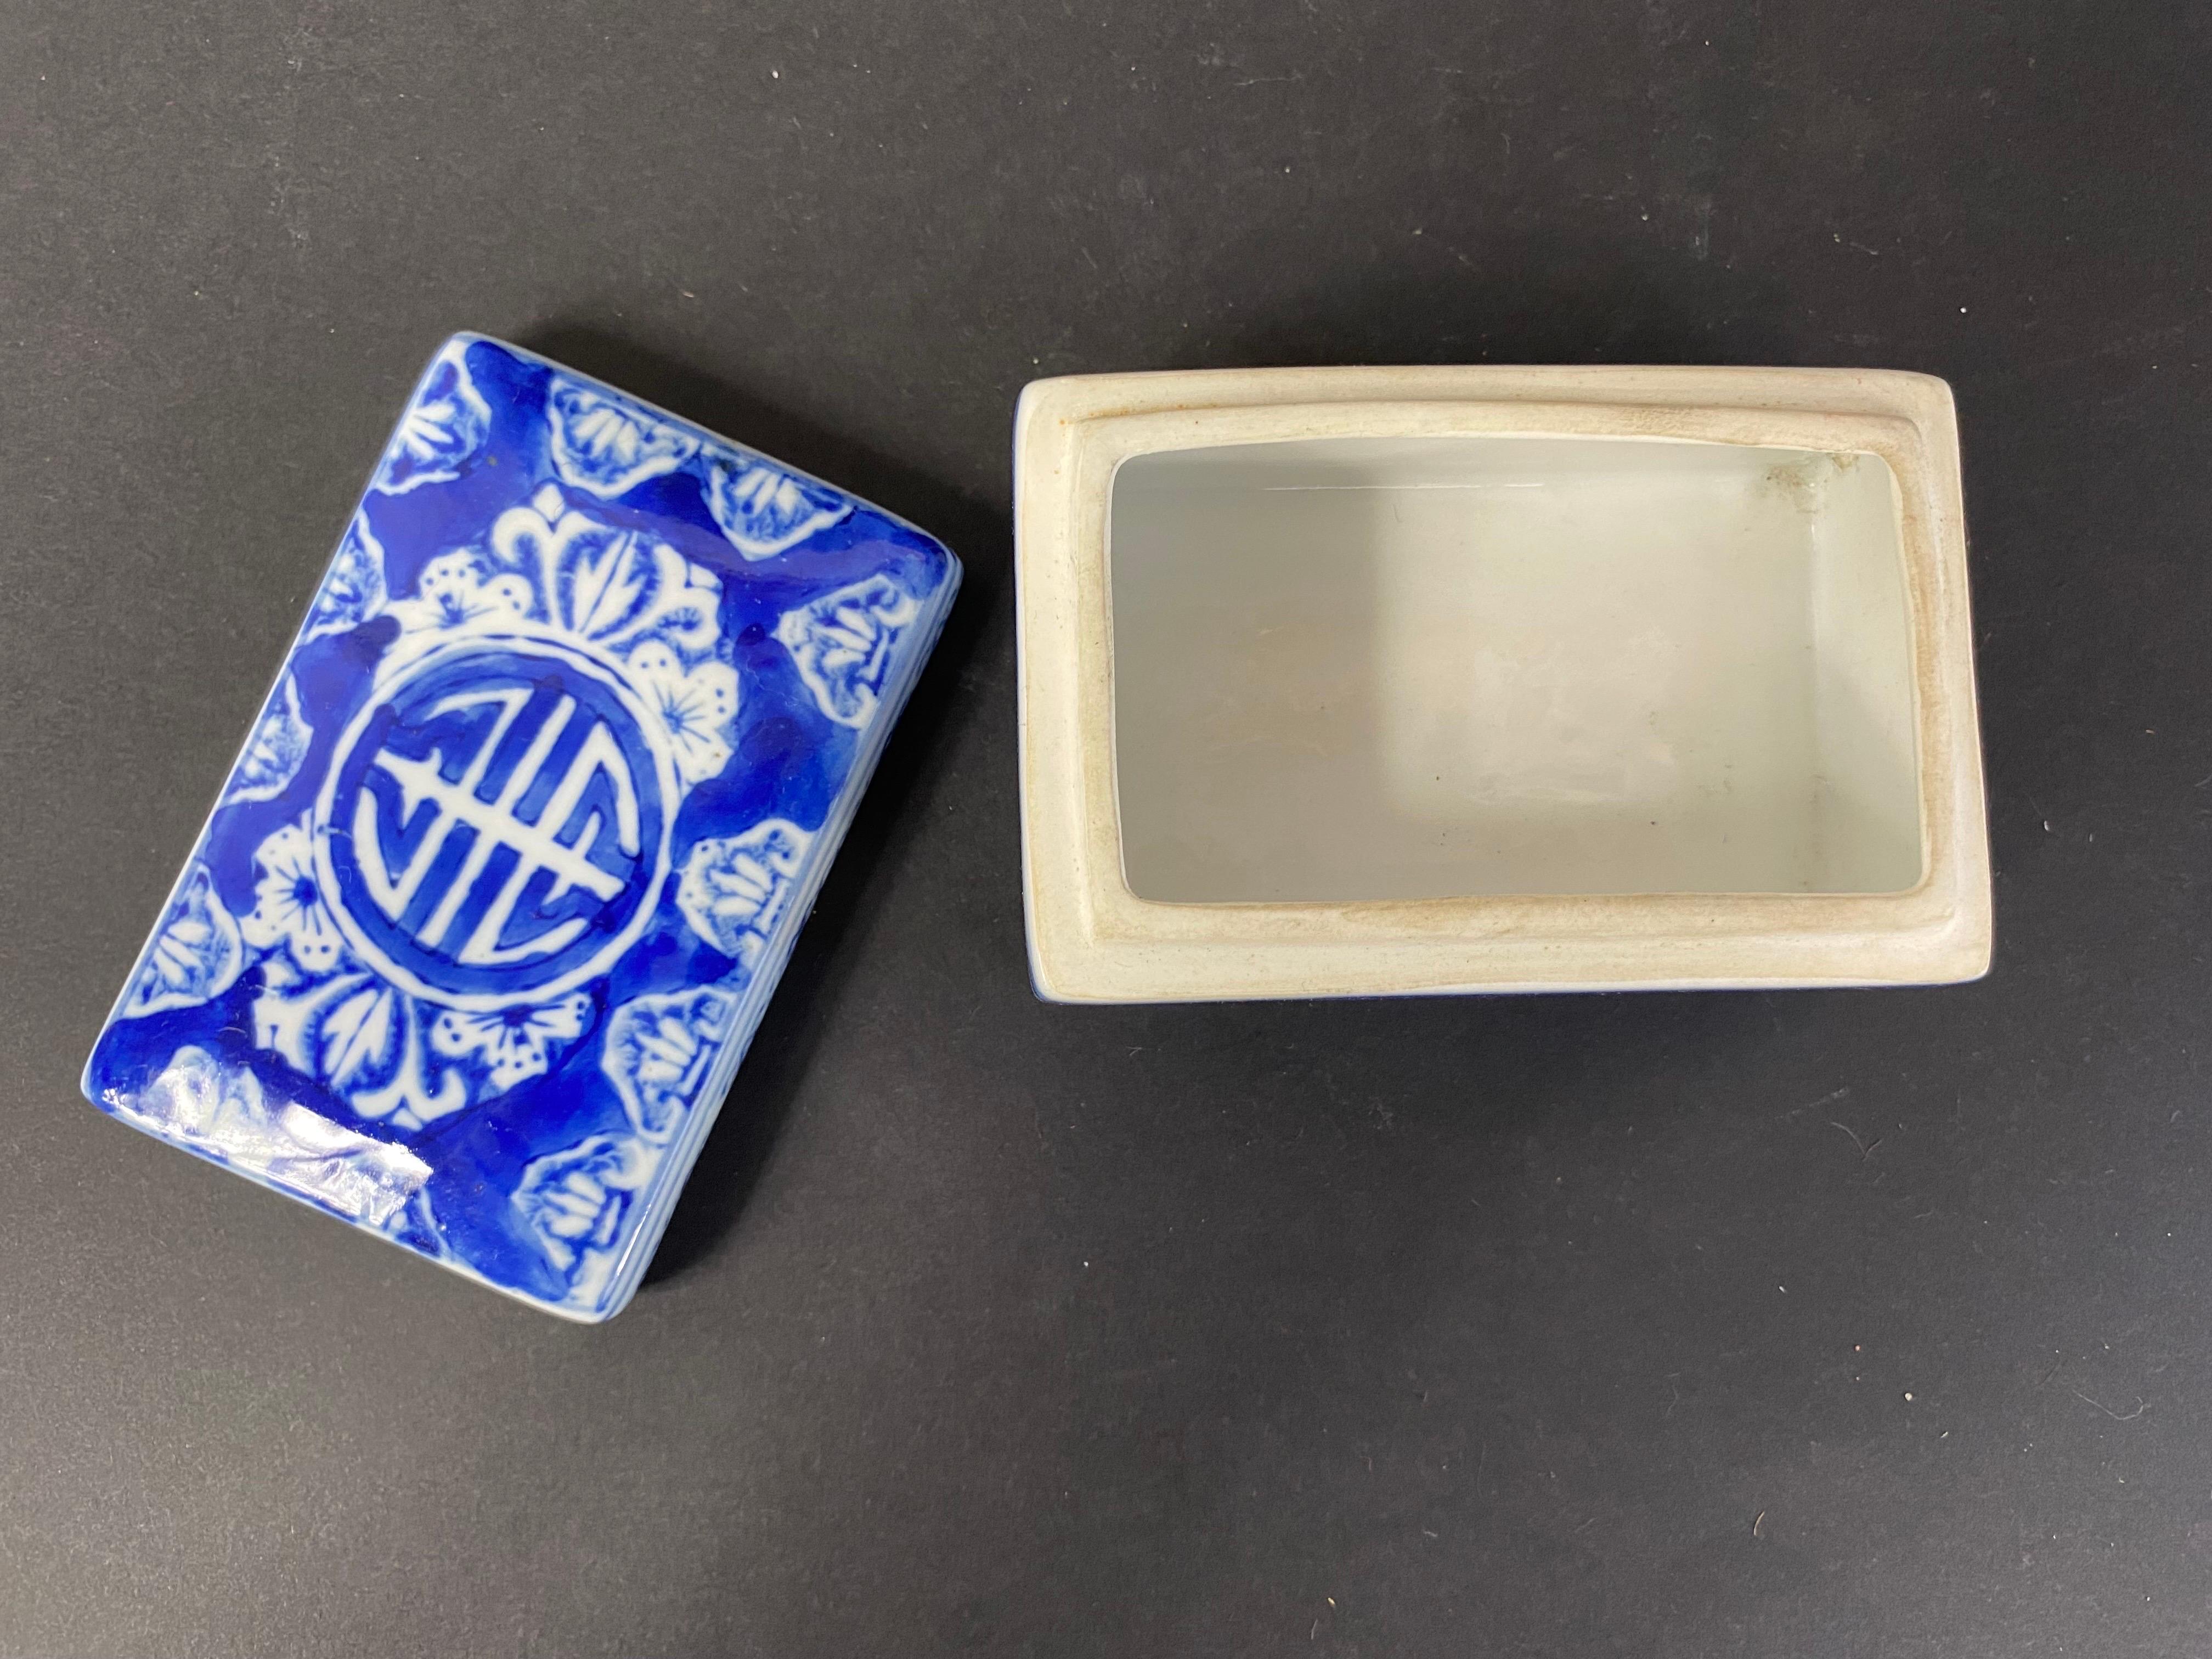 Blue and White Porcelain Ink Writing Jewerly Box - China 1900 Asian art XXth For Sale 2